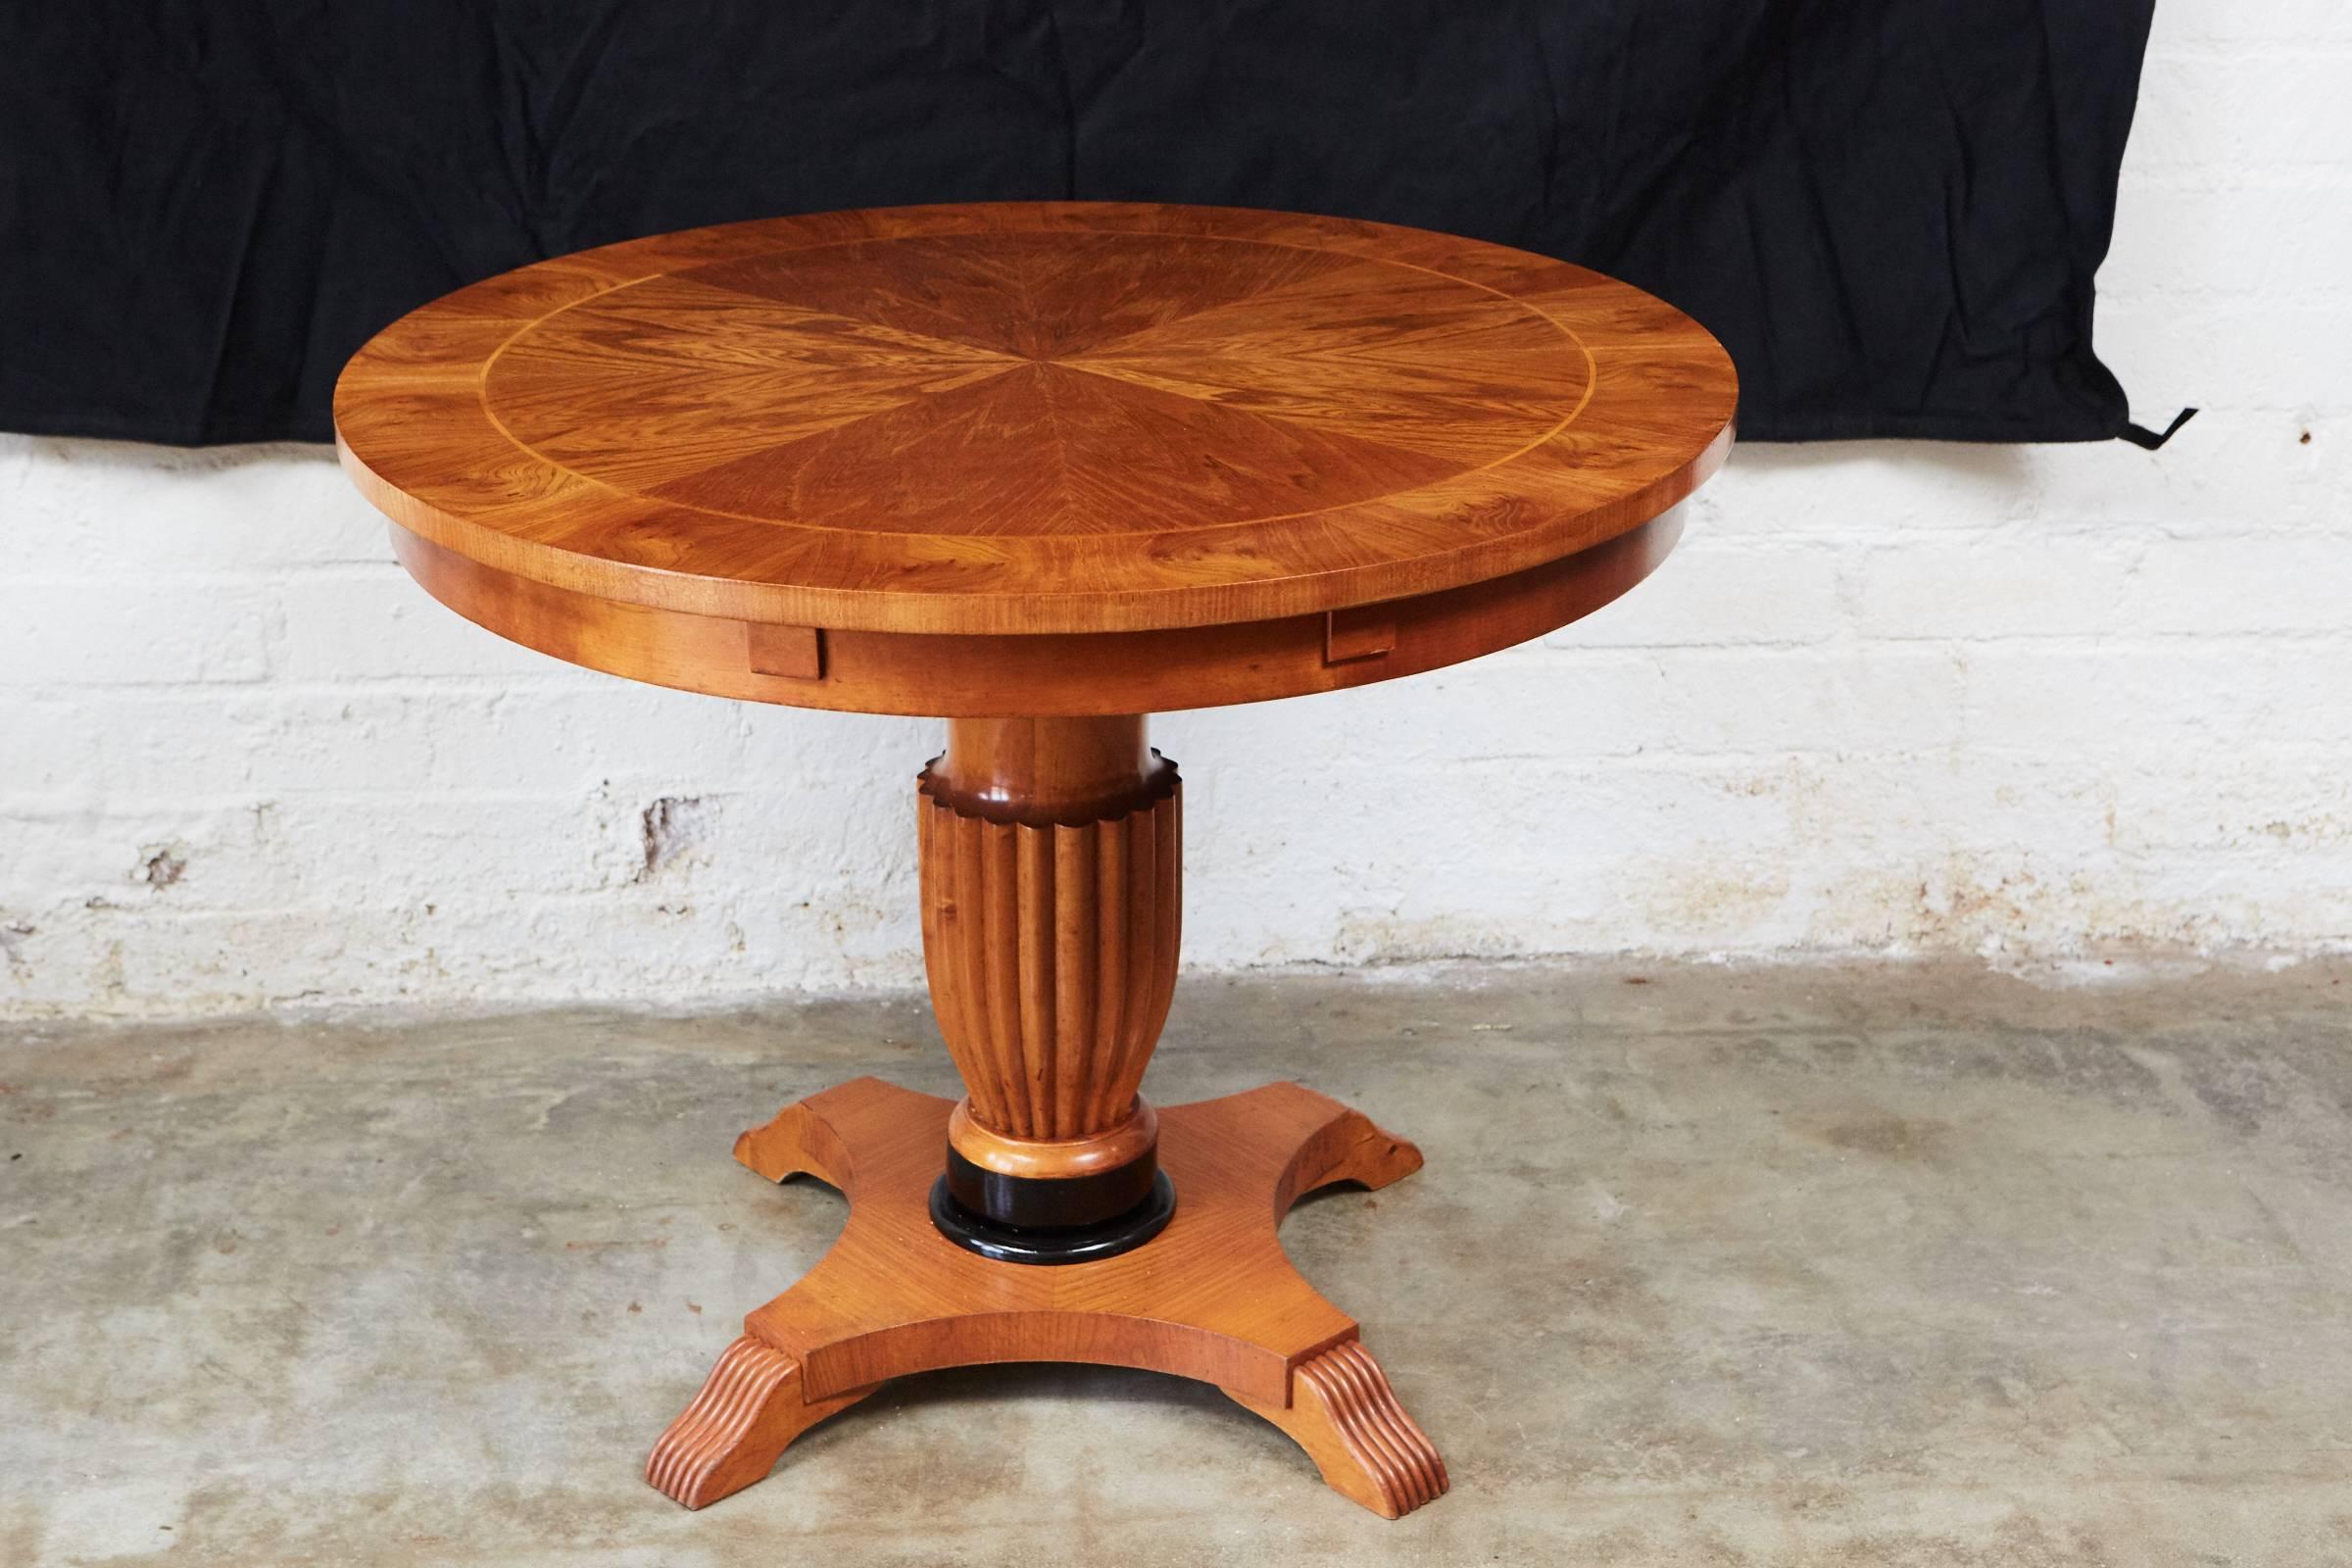 This handsome Biedermeier pedestal table has a round veneered top with circular banding.The top is supported by a fluted central stem with a black painted detail on a platform base with four scrolled feet.

